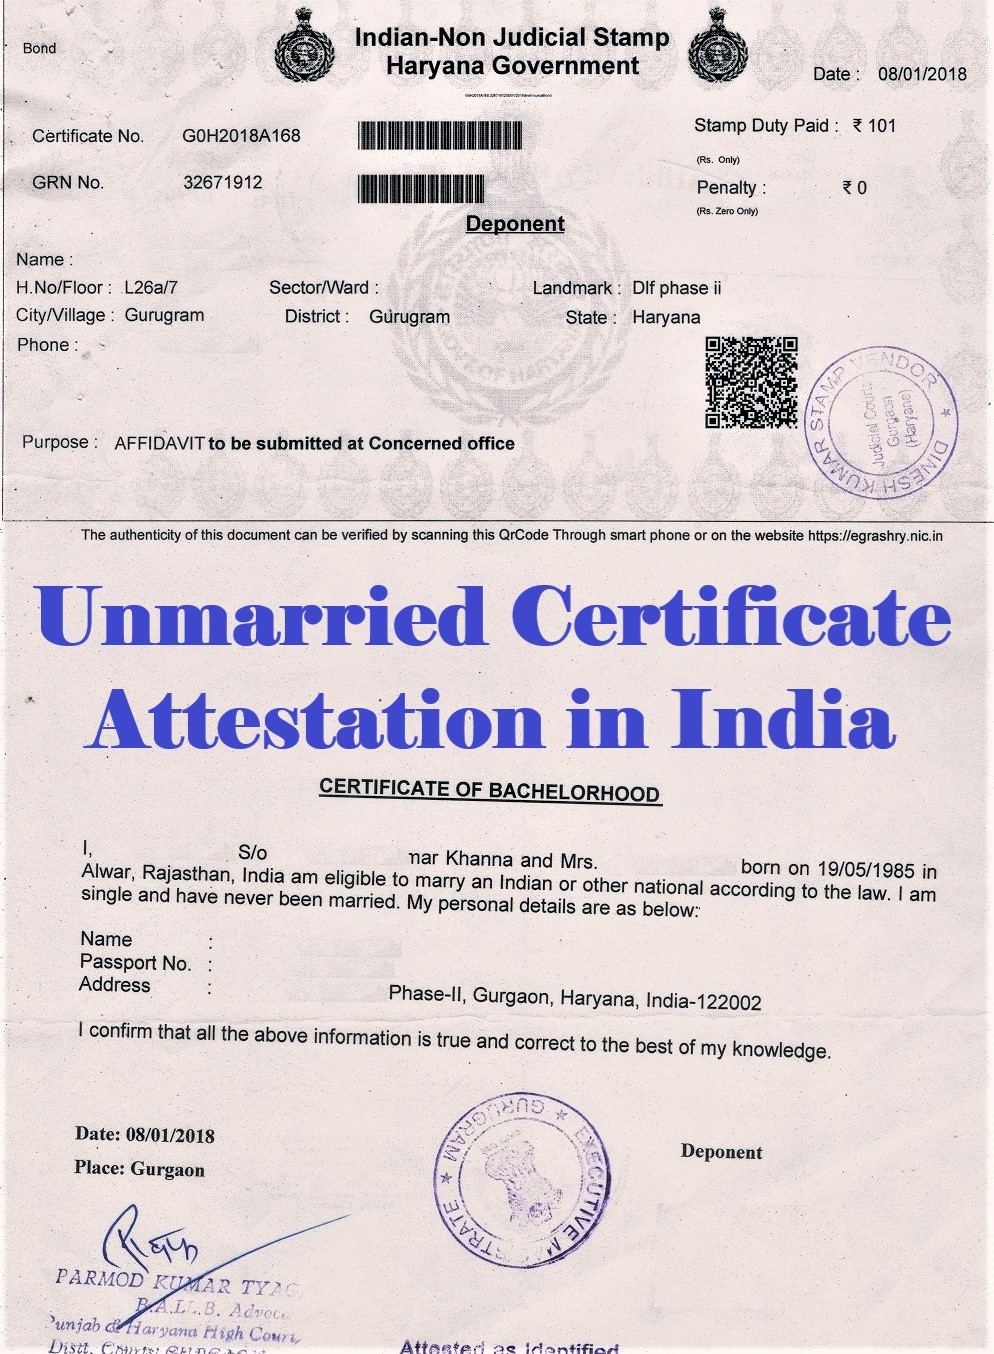 Unmarried Certificate Attestation from Tonga Embassy